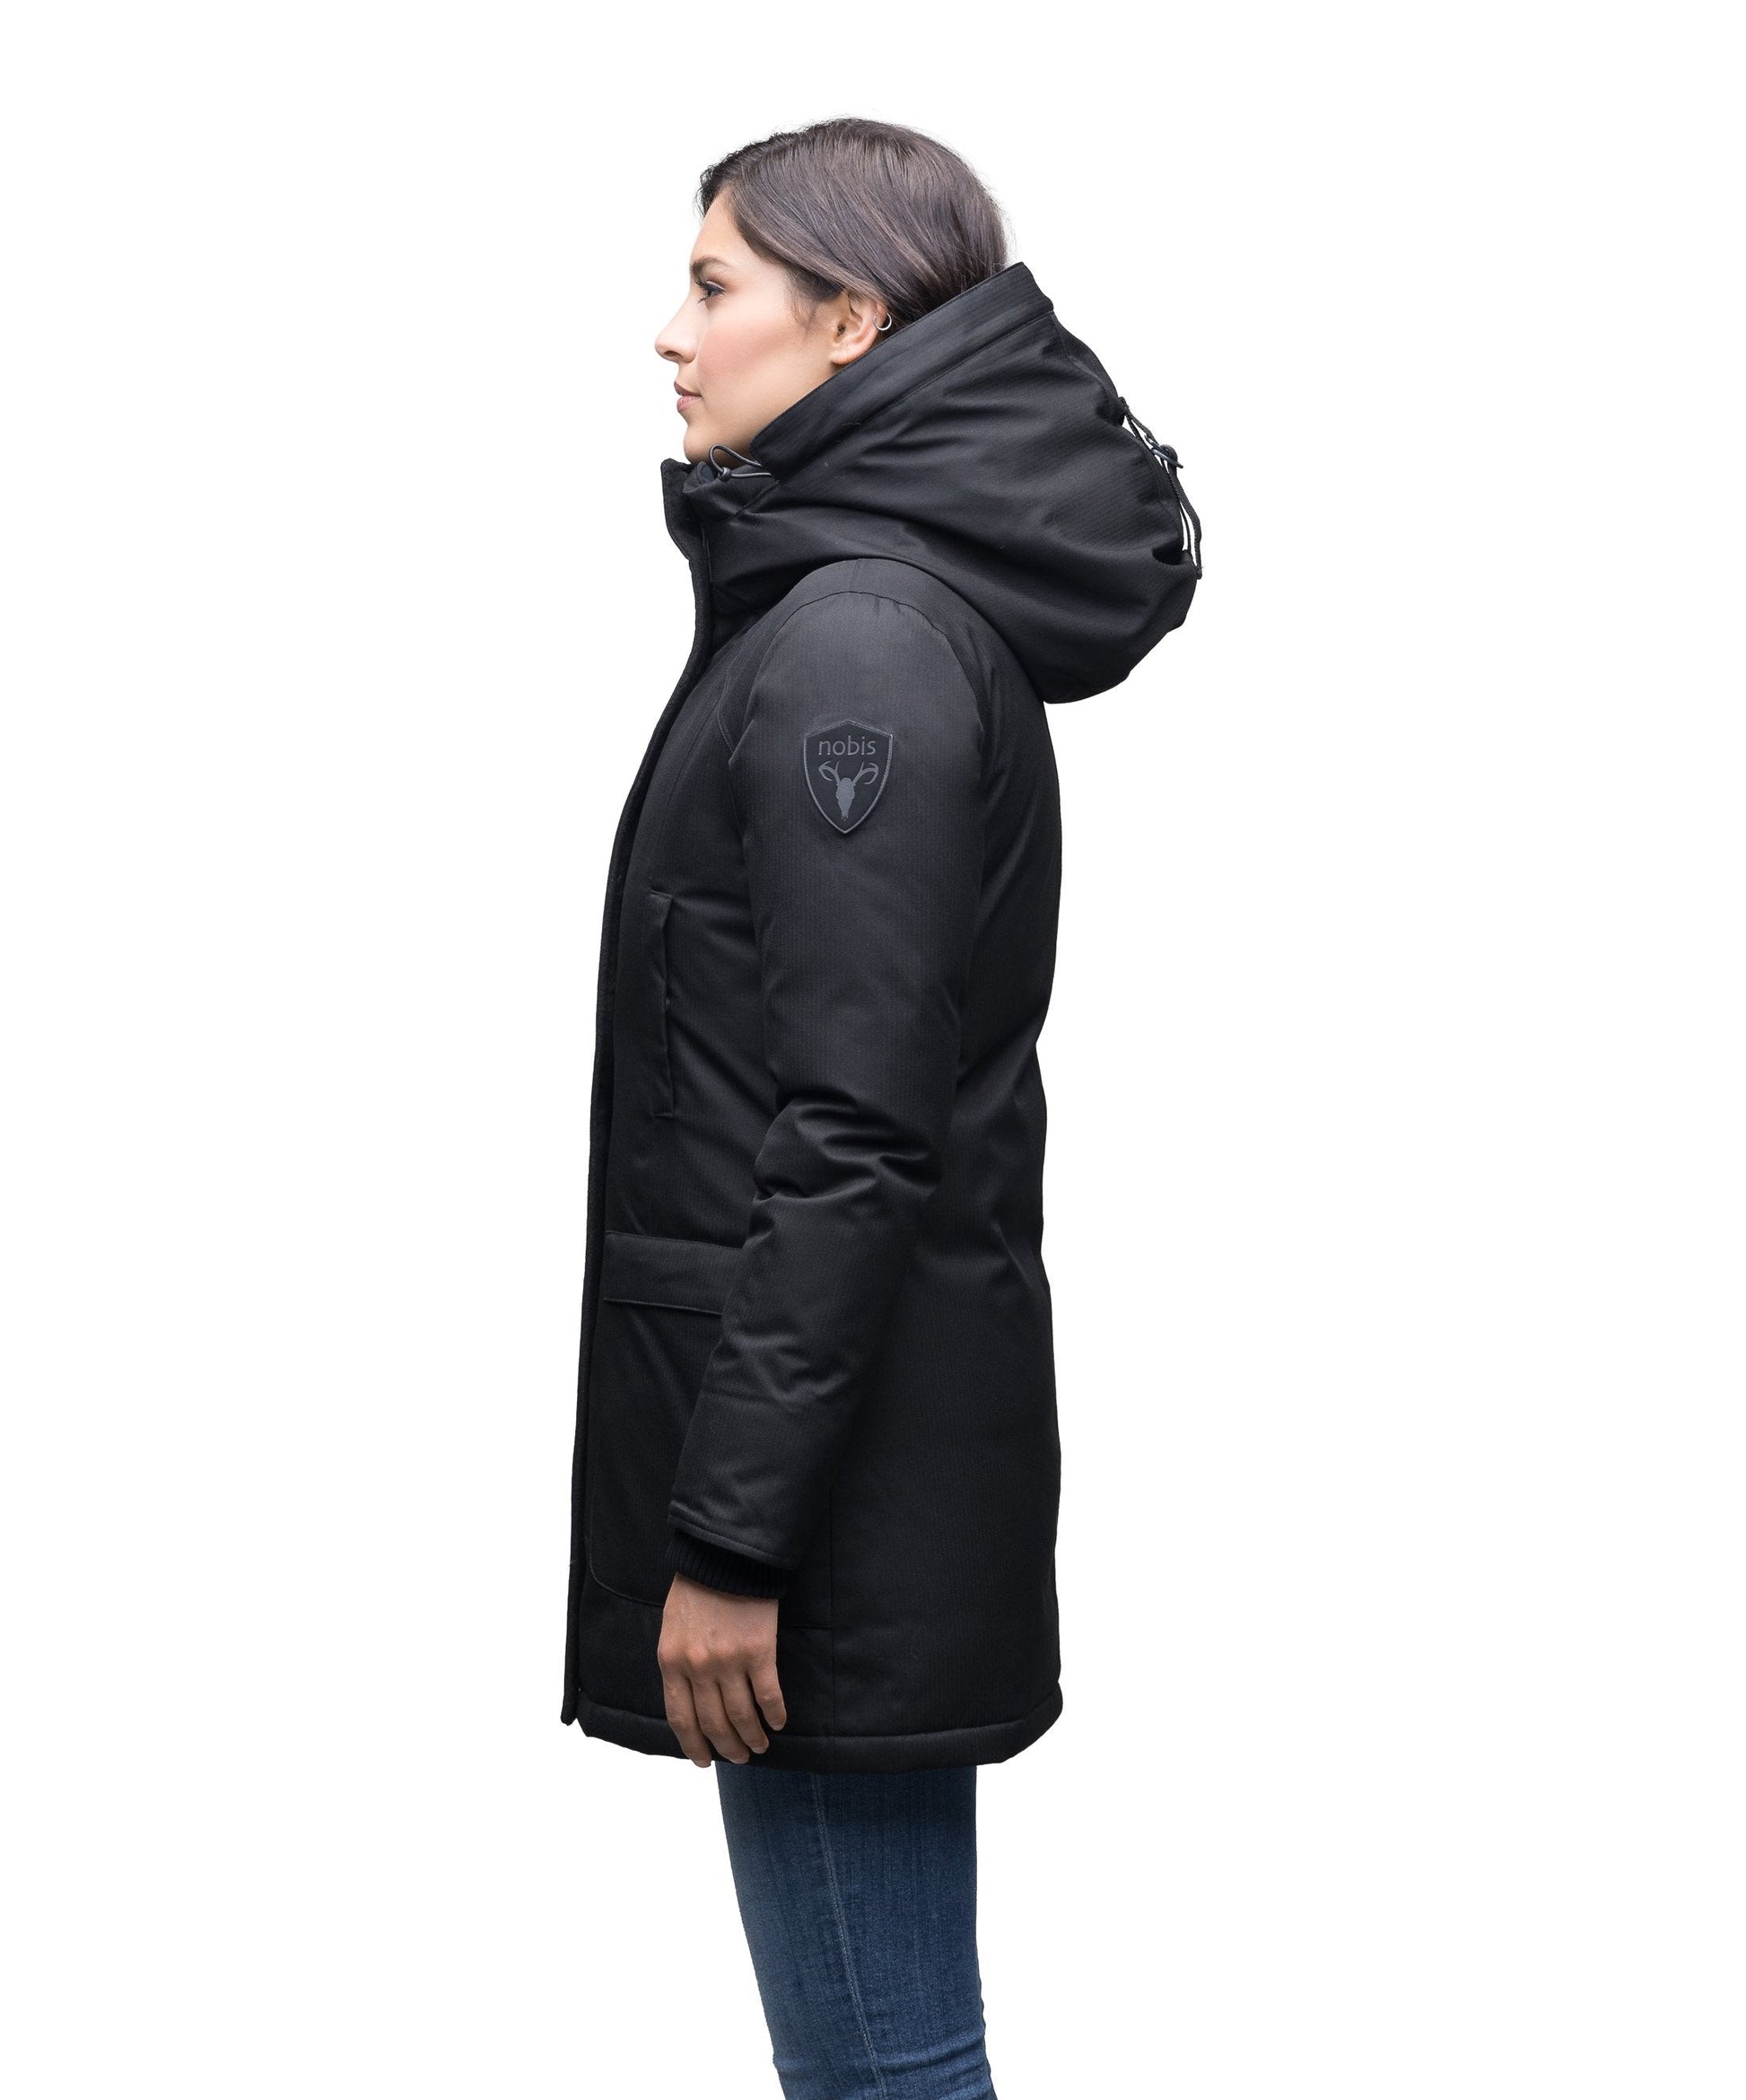 Women's down filled parka that sits just below the hip with a clean look and two hip patch pockets in BlackCarla Furless Ladies Parka in thigh length with Canadian Premium White Duck Down insulation, non-removable hood, centre-front zipper with magnetic closure wind flap, and four exterior pockets, in Black